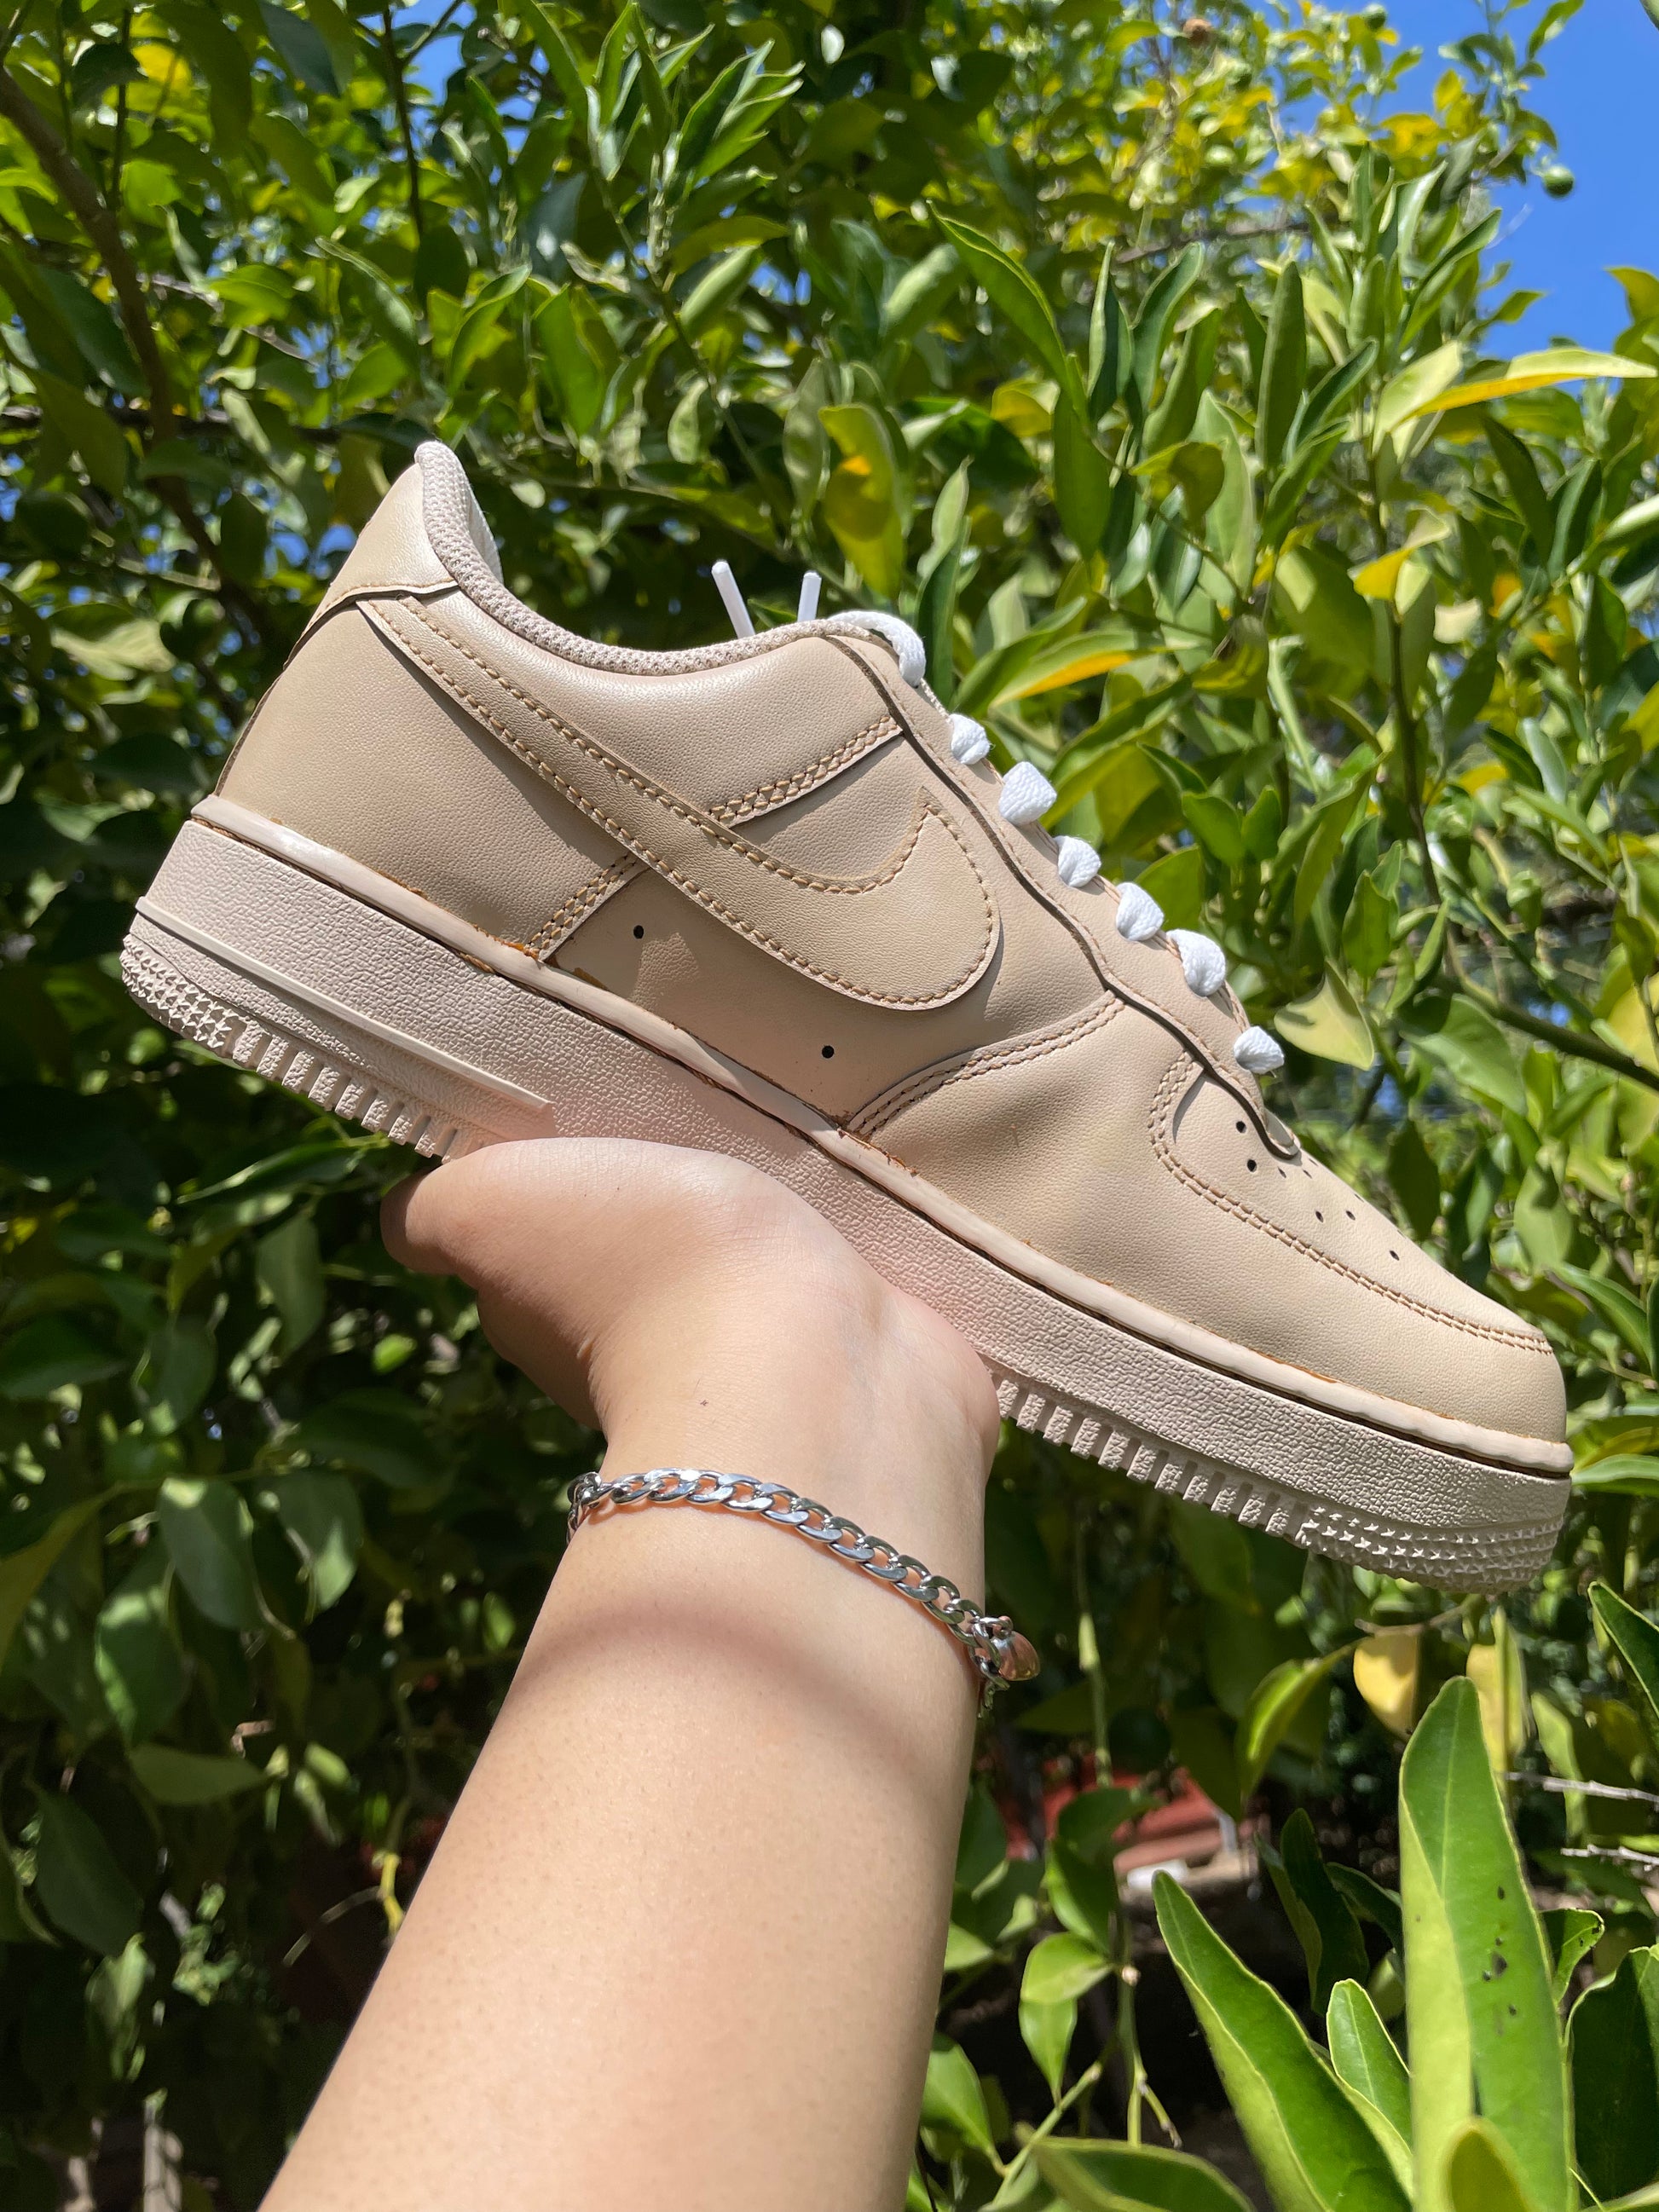 DIY Custom Shoes  Earth Tones Air Force 1 Customs with